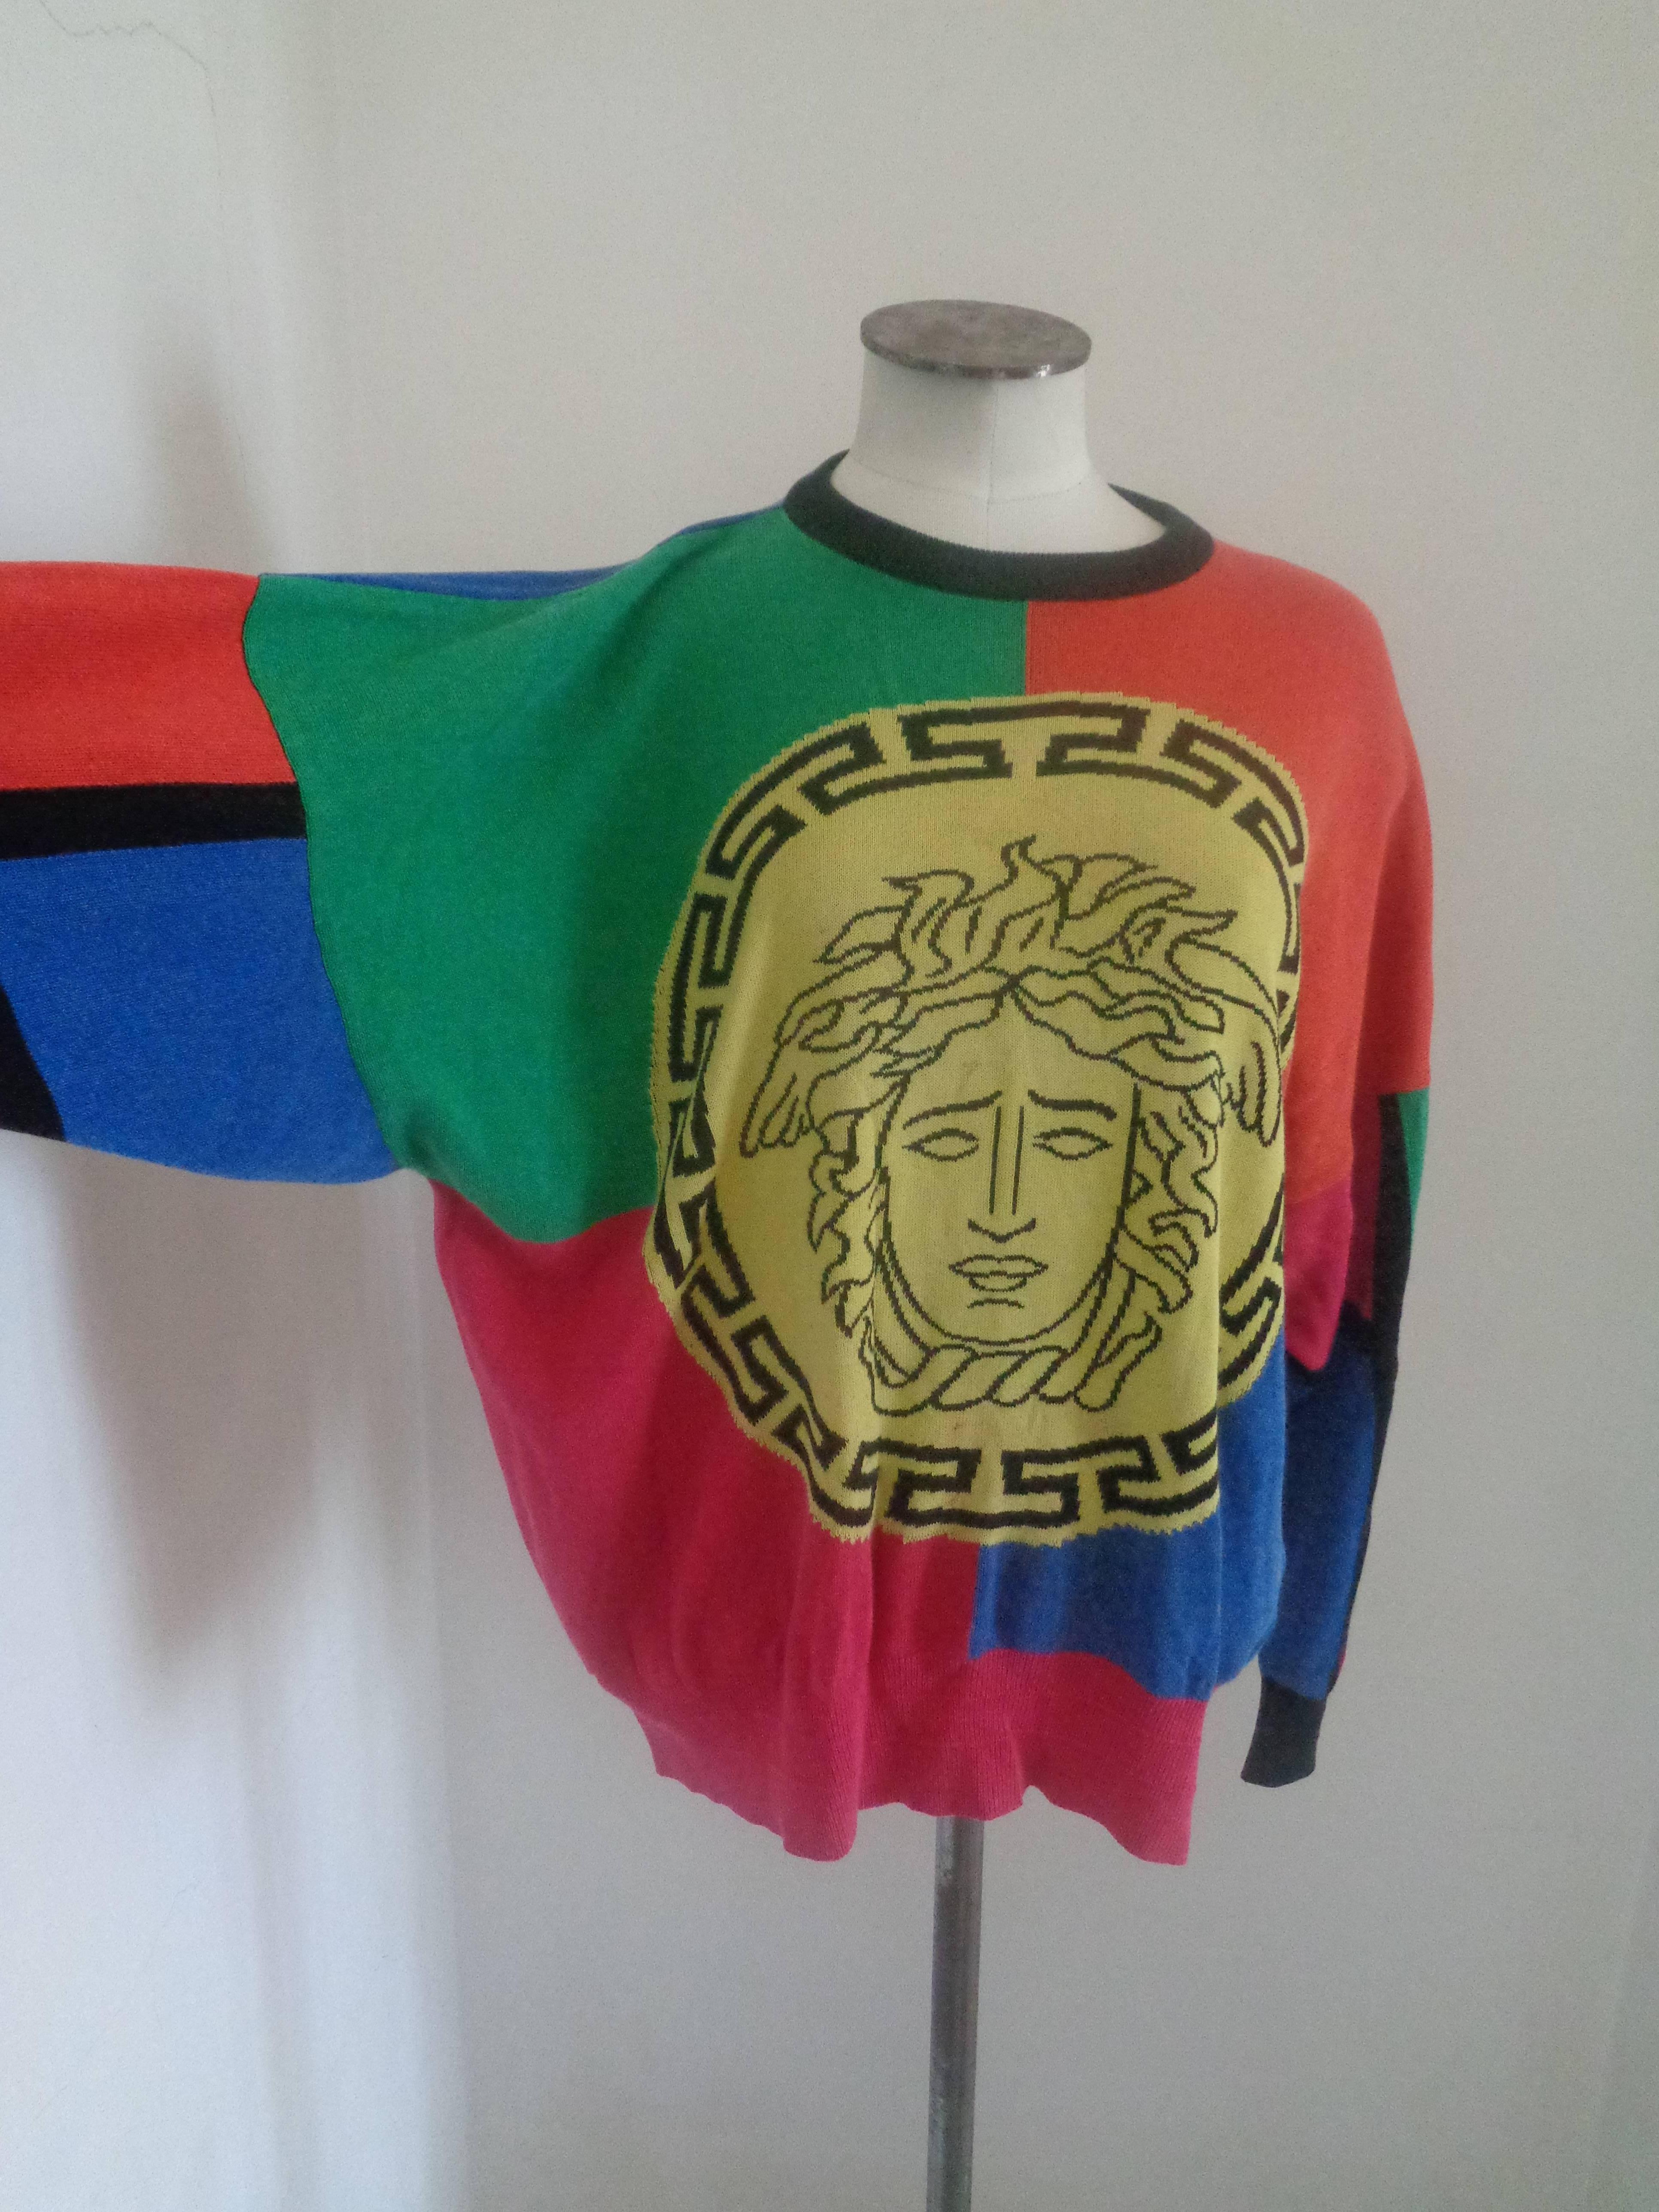 Versace Medusa Logo multicolour Shirt

totally made in italy in size L 